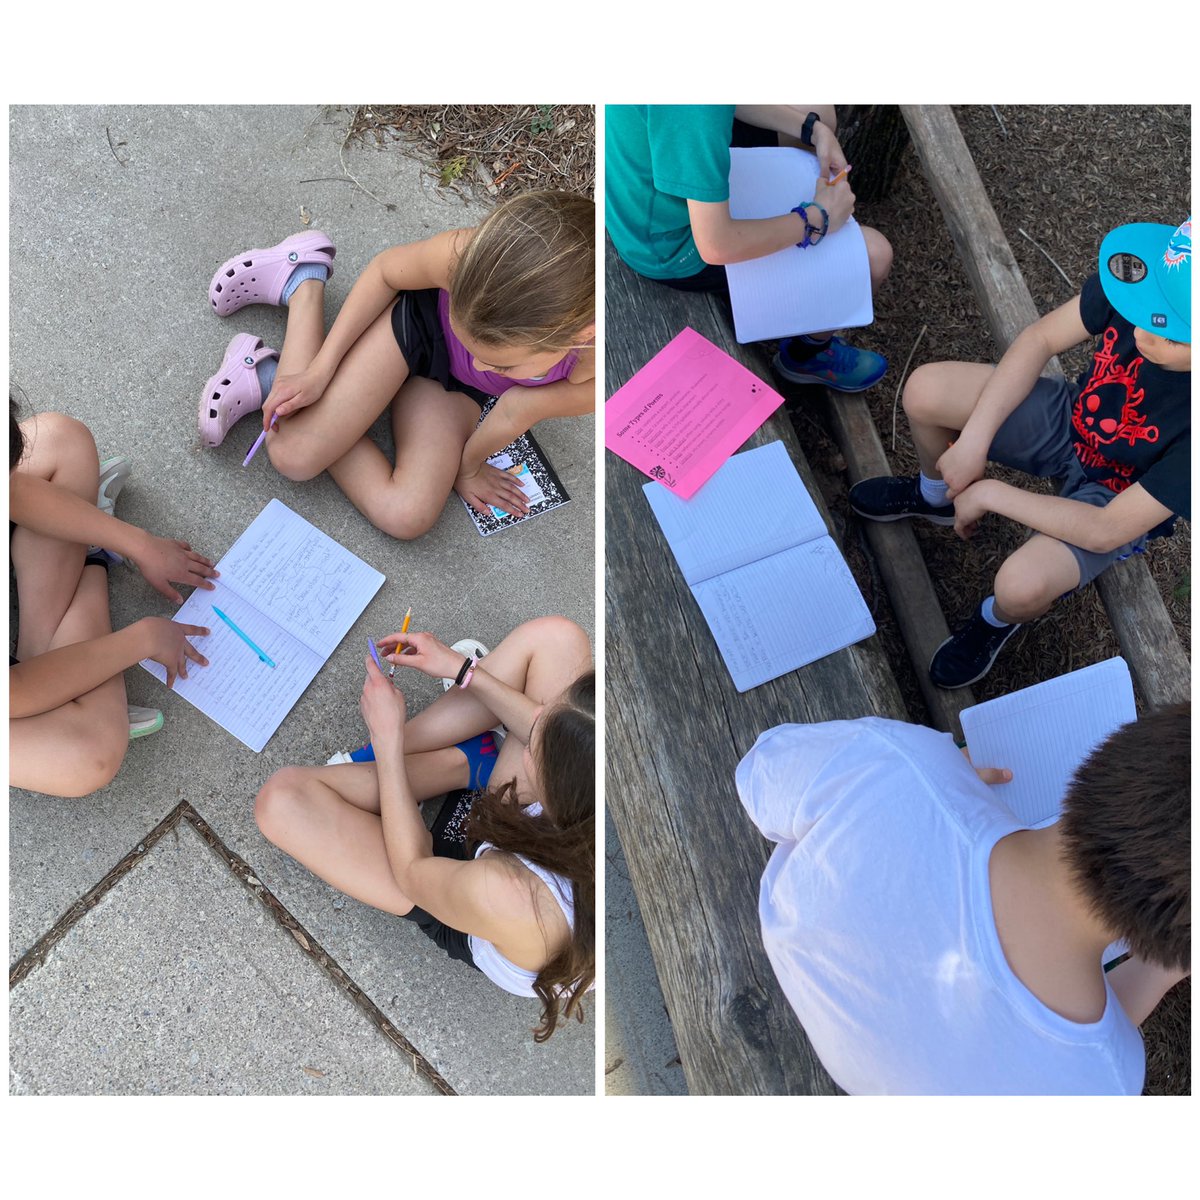 Ss enjoyed working on their poems outside in the garden today ☀️